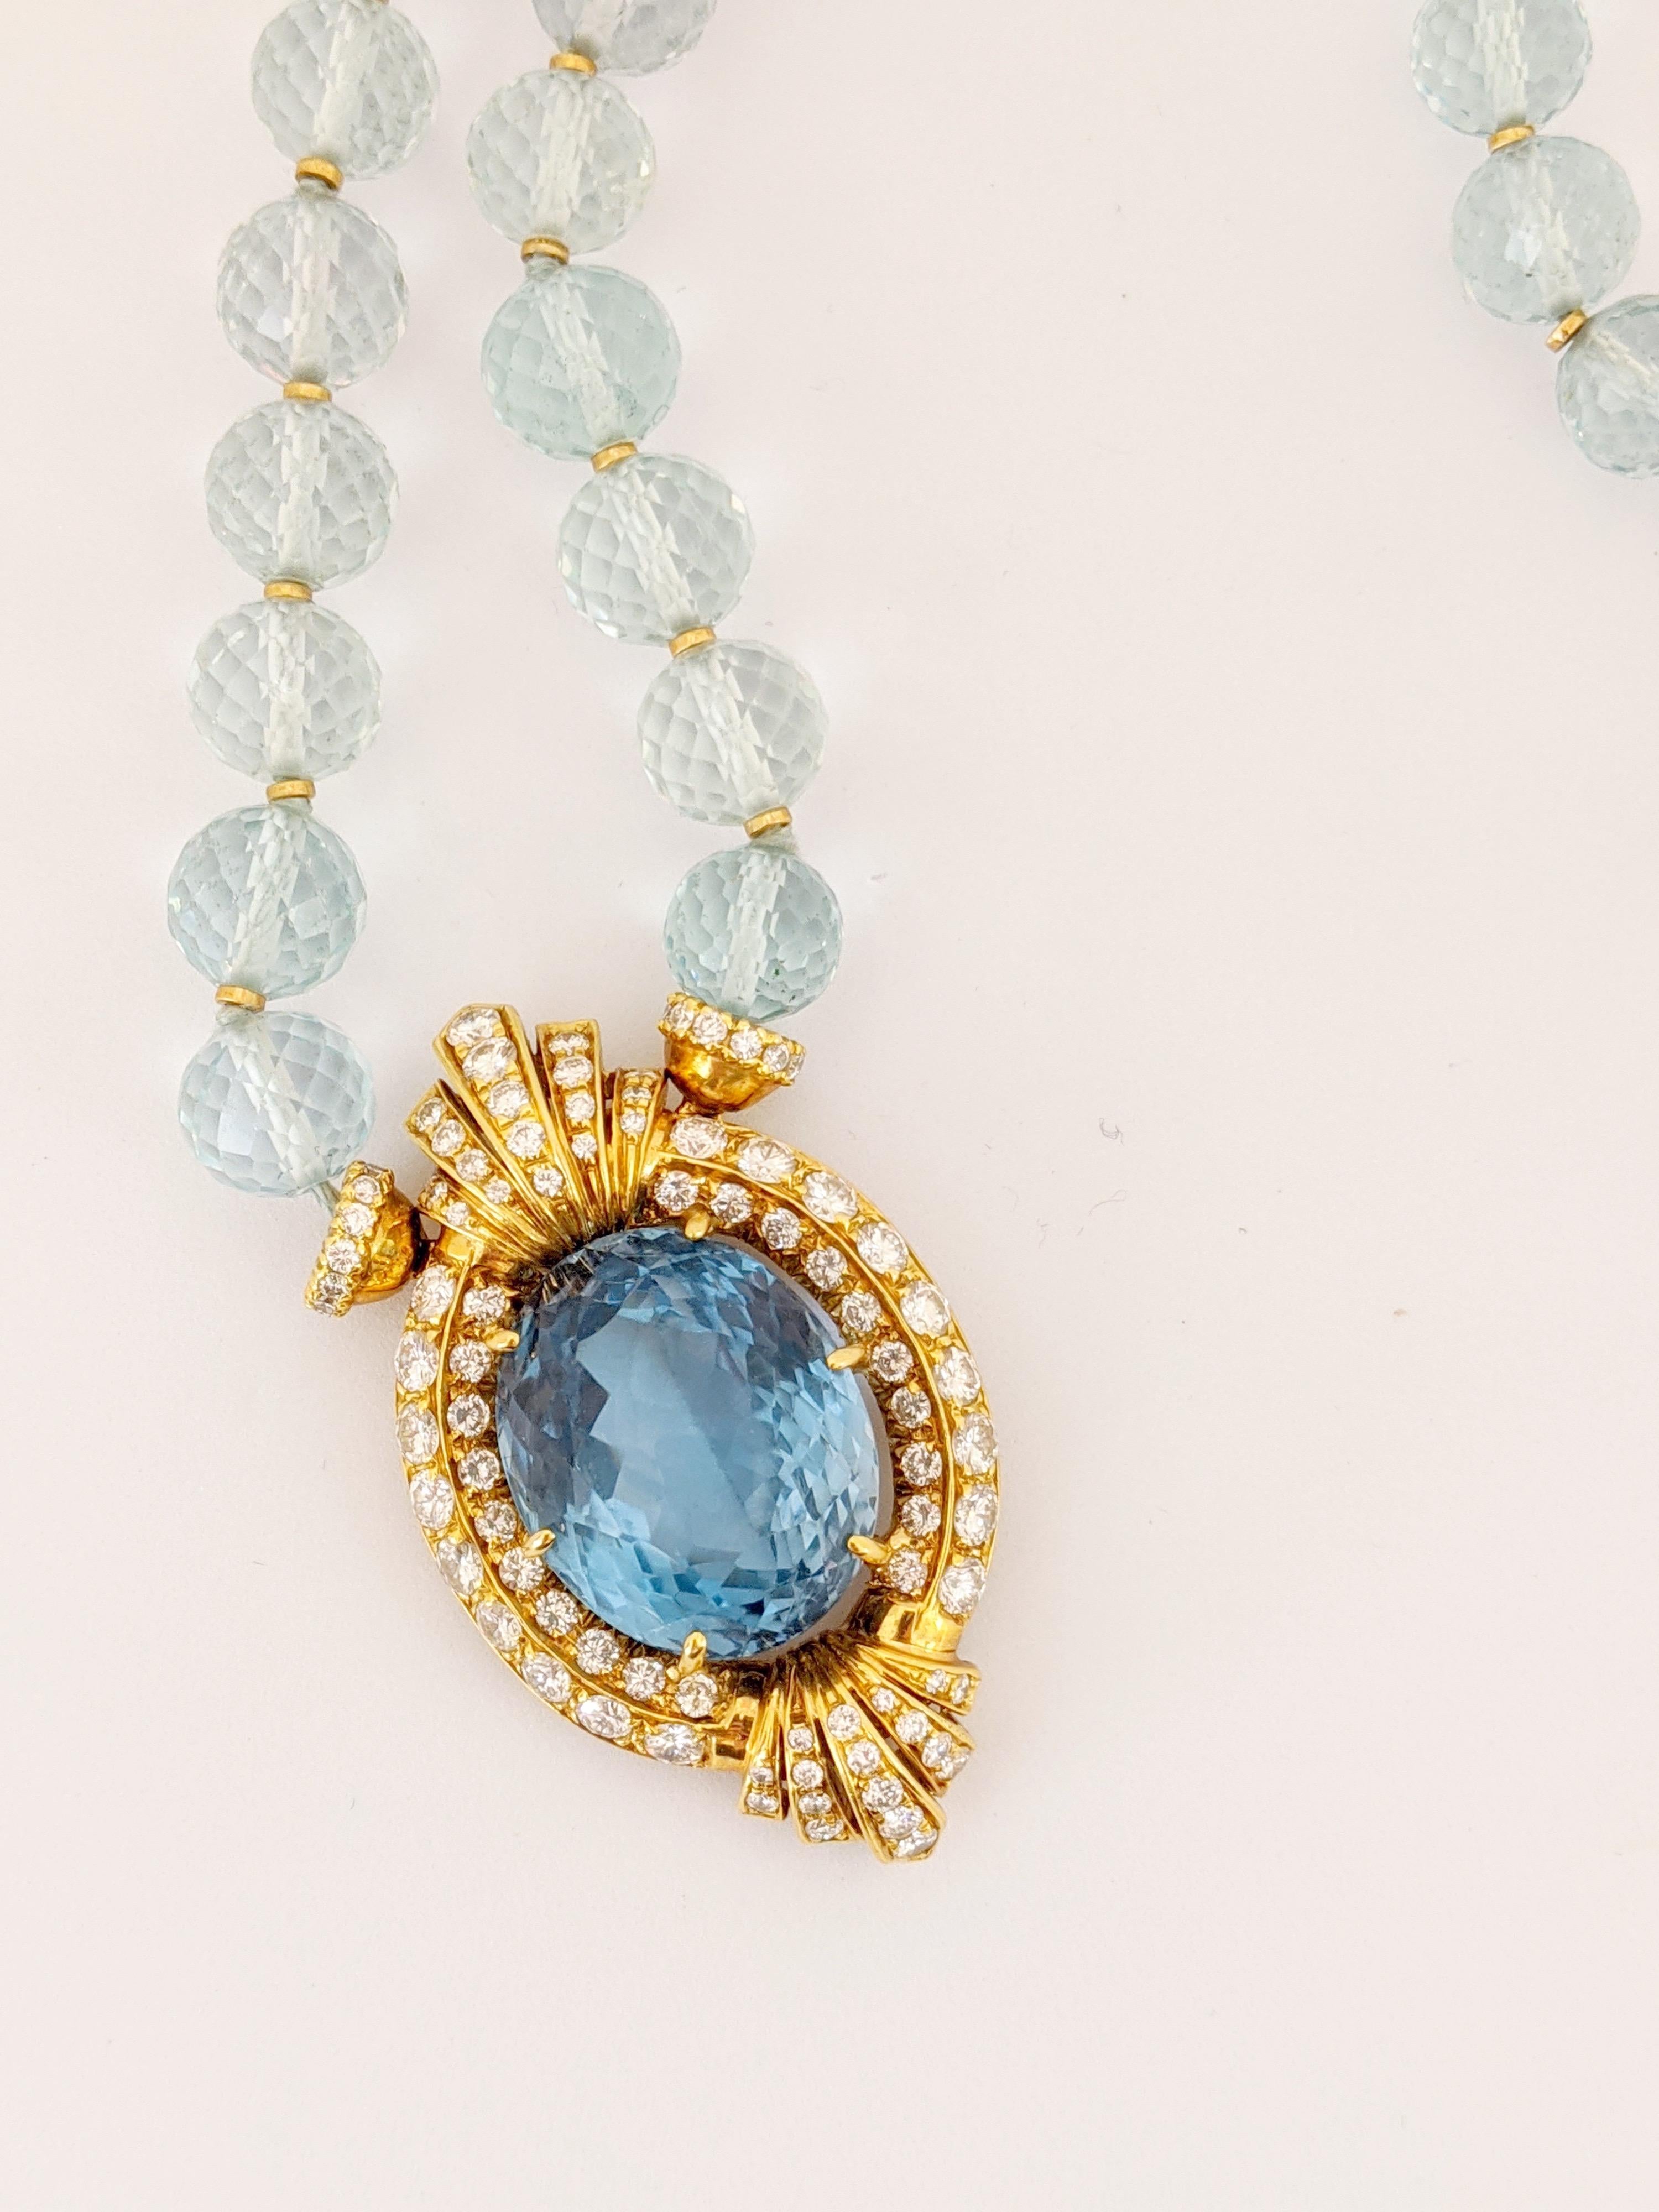 This majestic necklace features a showstopping  43.50 carat Oval Blue Topaz set in an elaborate 18 karat yellow gold and Diamond setting. The pendant is set on a strand of natural colored Aquamarine beads. The faceted beads are spaced with 18 karat